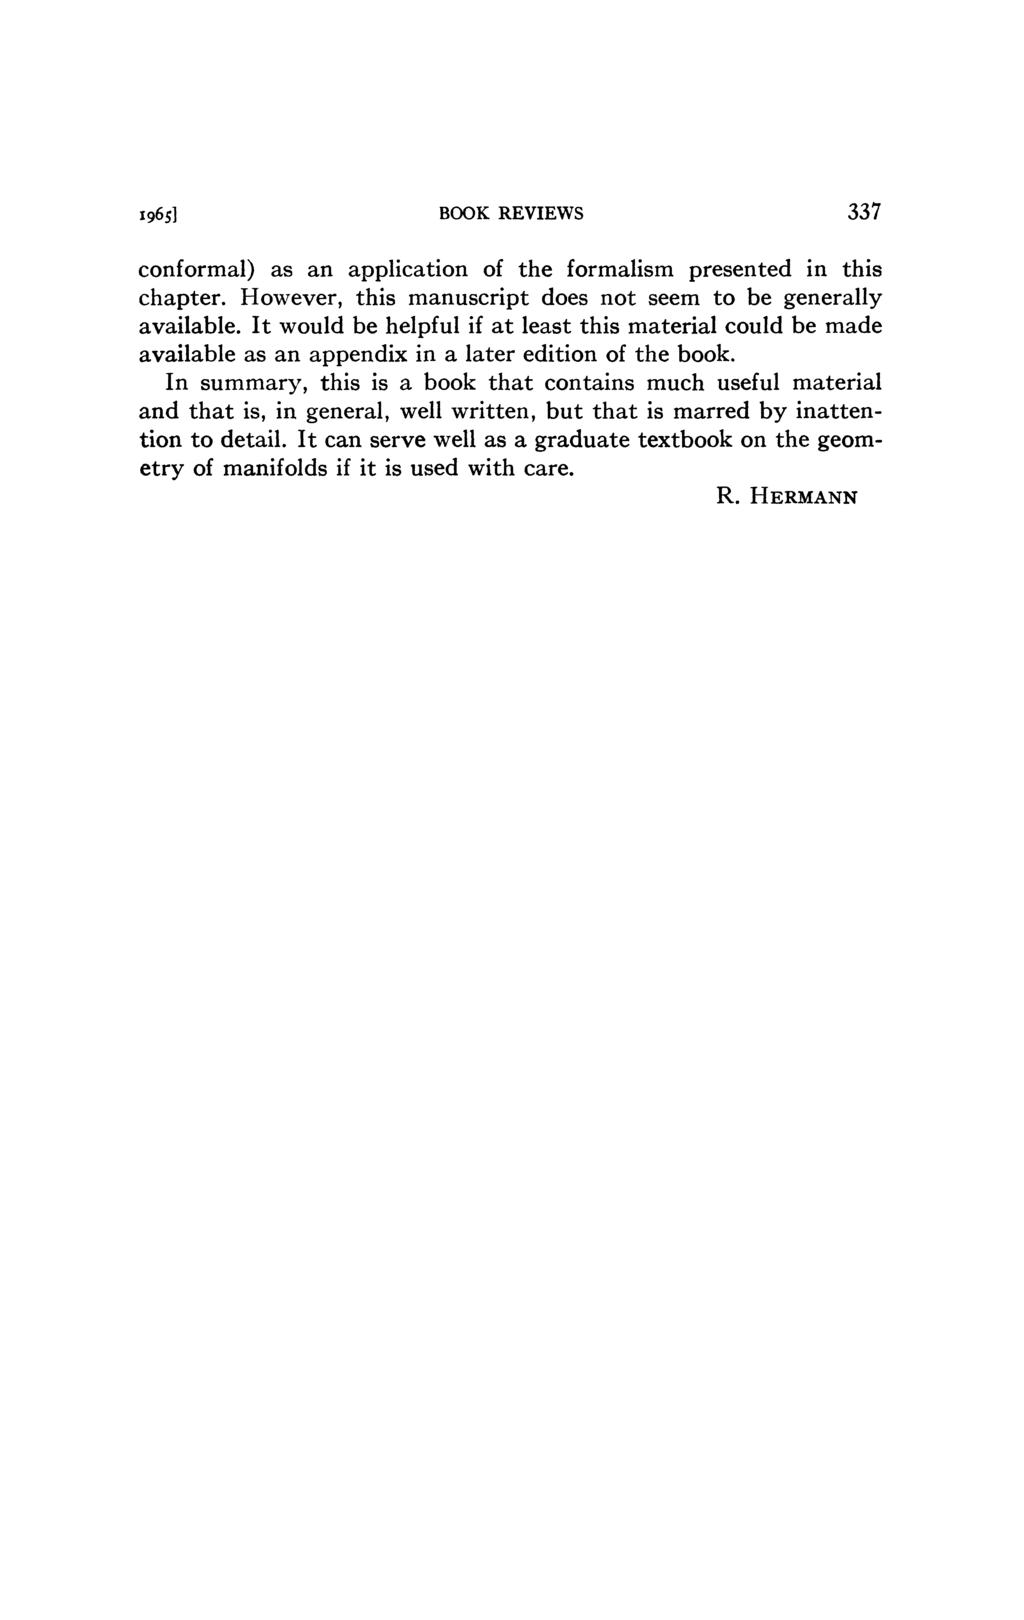 1965] BOOK REVIEWS 337 conformai) as an application of the formalism presented in this chapter. However, this manuscript does not seem to be generally available.